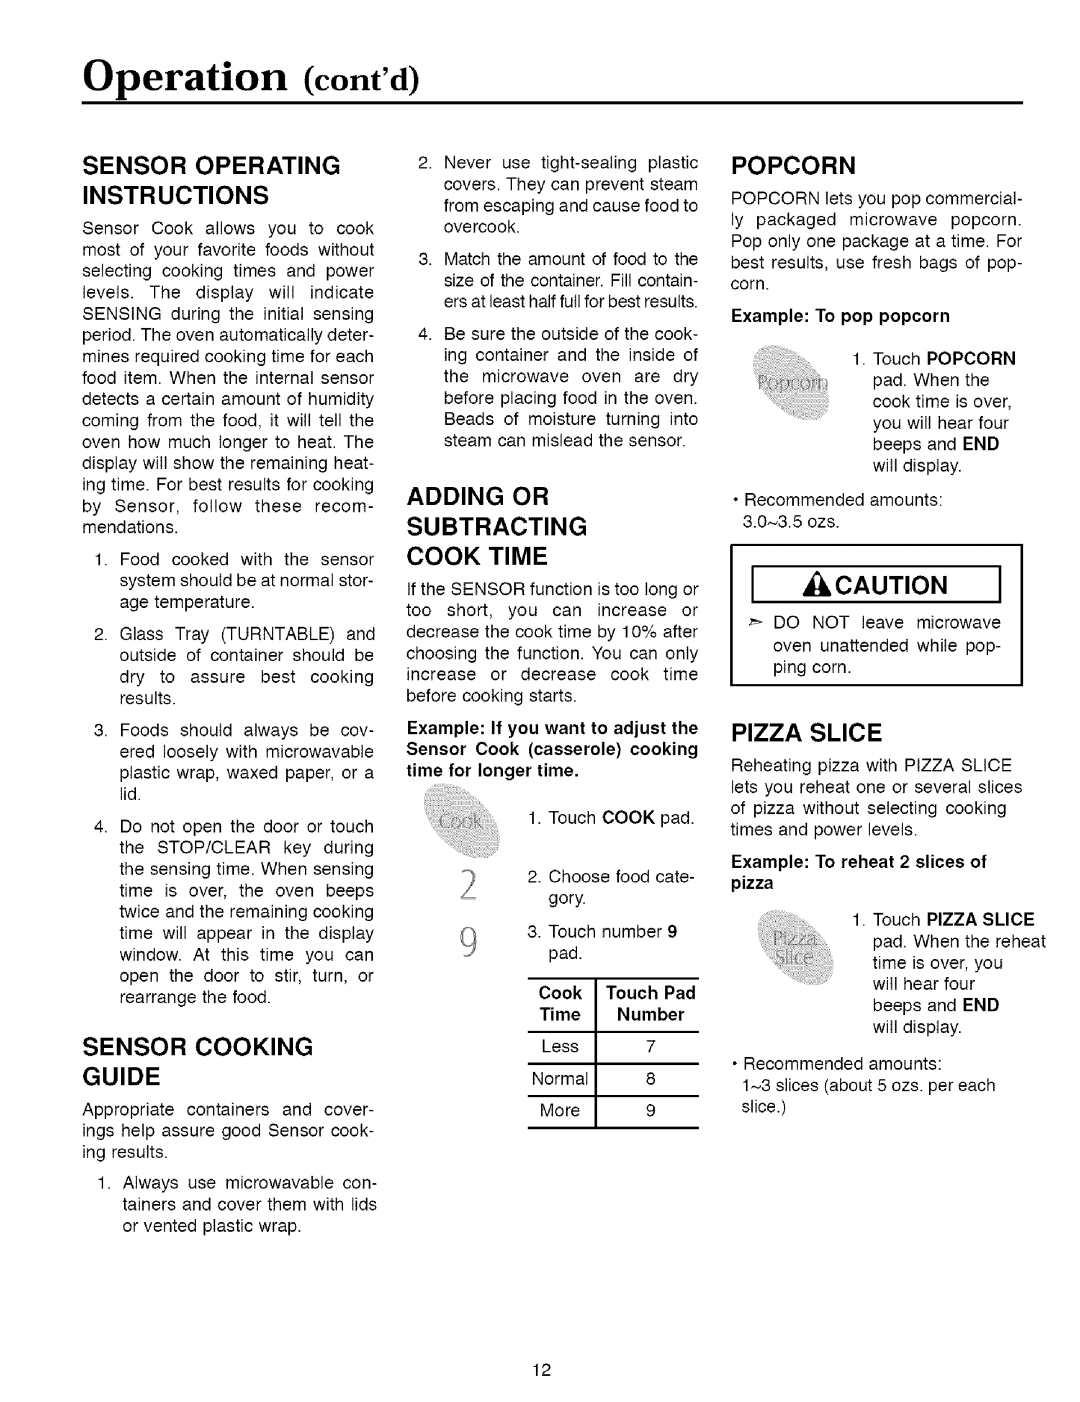 Maytag MMVS156AA I a,CAUTIONI, Sensor Operating Instructions, Sensor Cooking Guide, Adding Or Subtracting Cook Time 